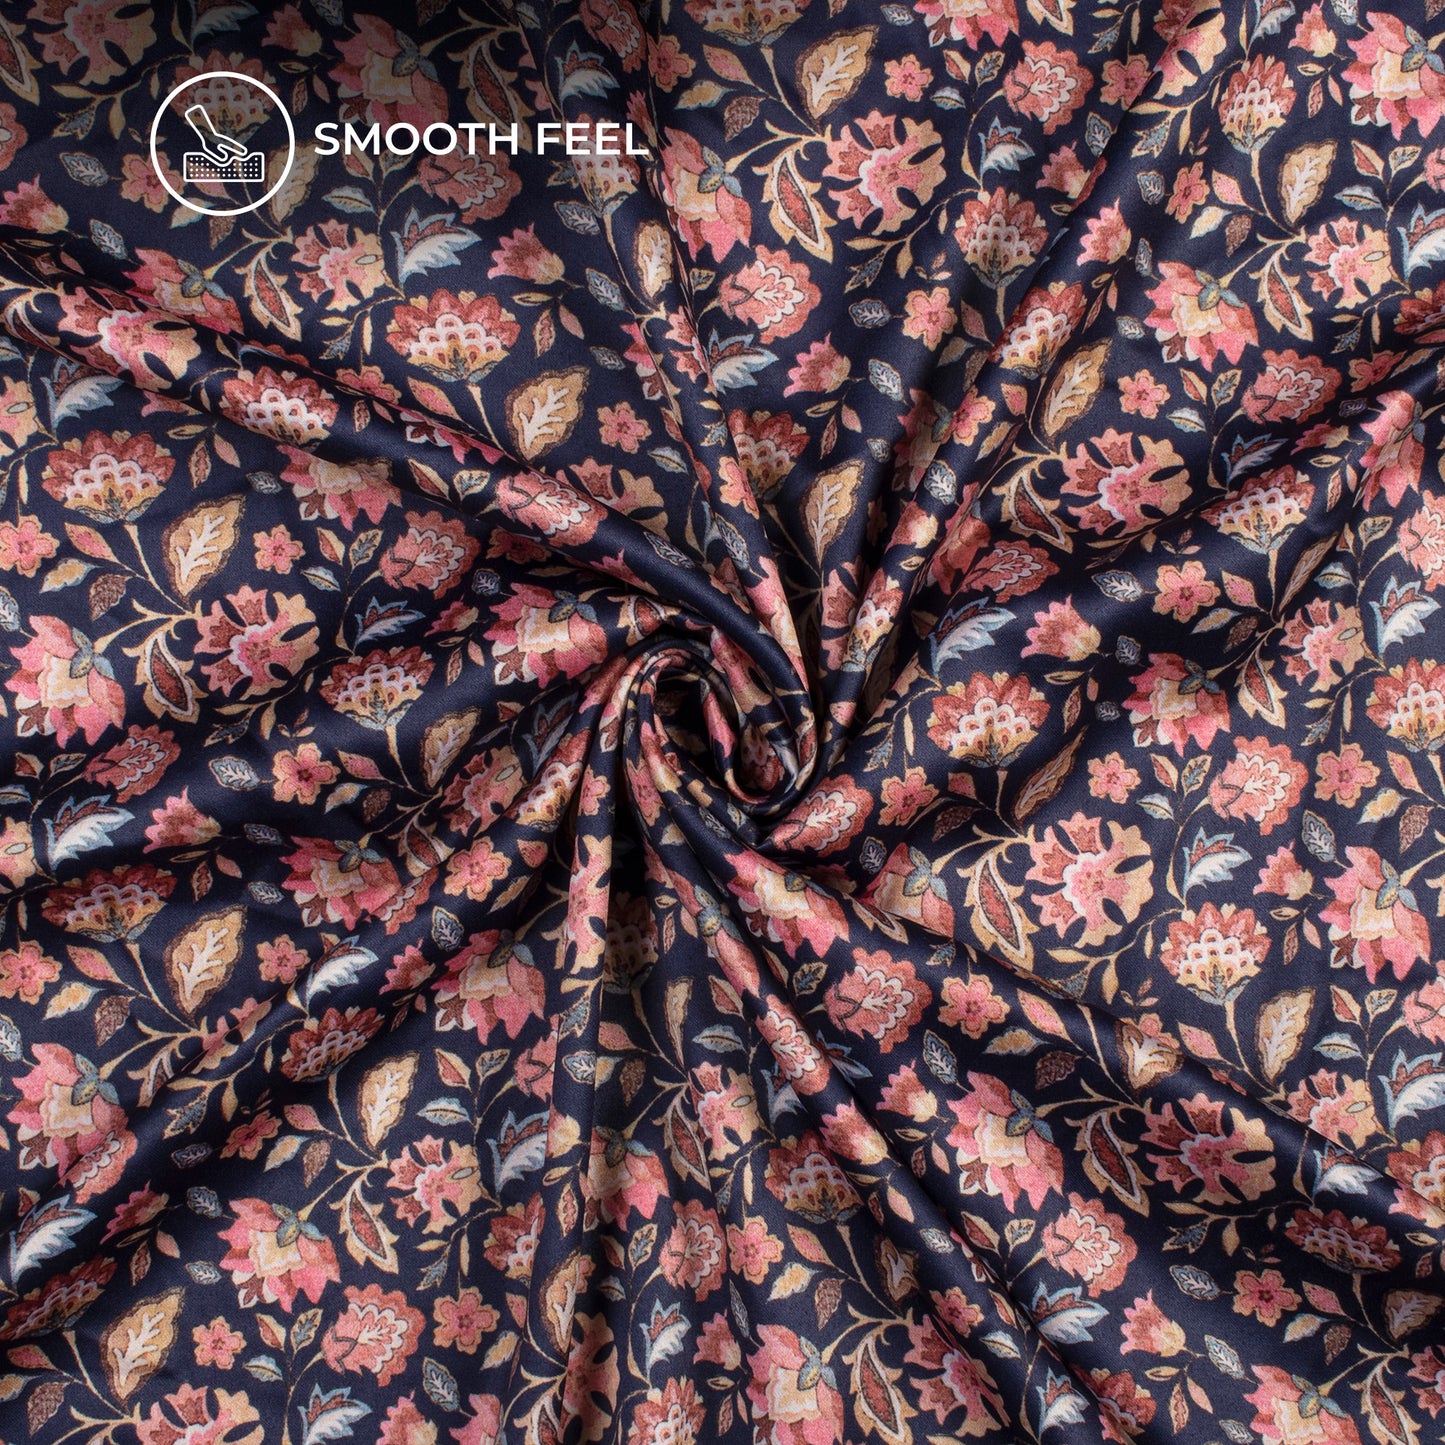 Navy Blue And Pink Floral Digital Print Charmeuse Satin Fabric (Width 58 Inches)